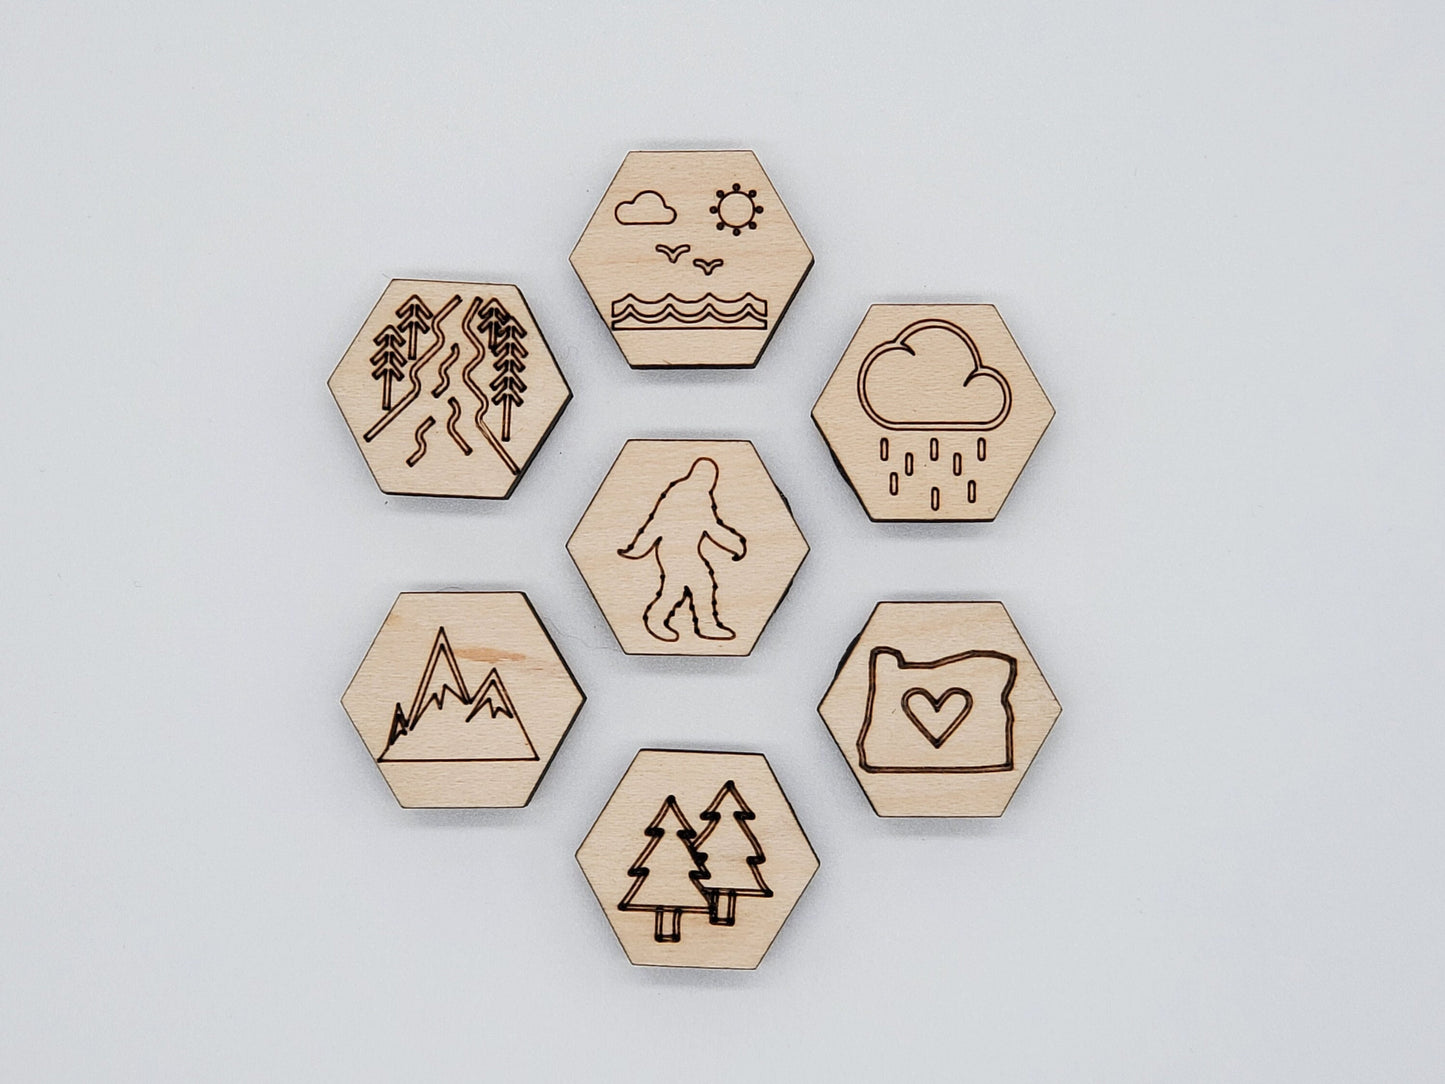 Oregon Magnets, Small Wood Magnets with Pictures Representing Oregon/PNW (Pacific Northwest)